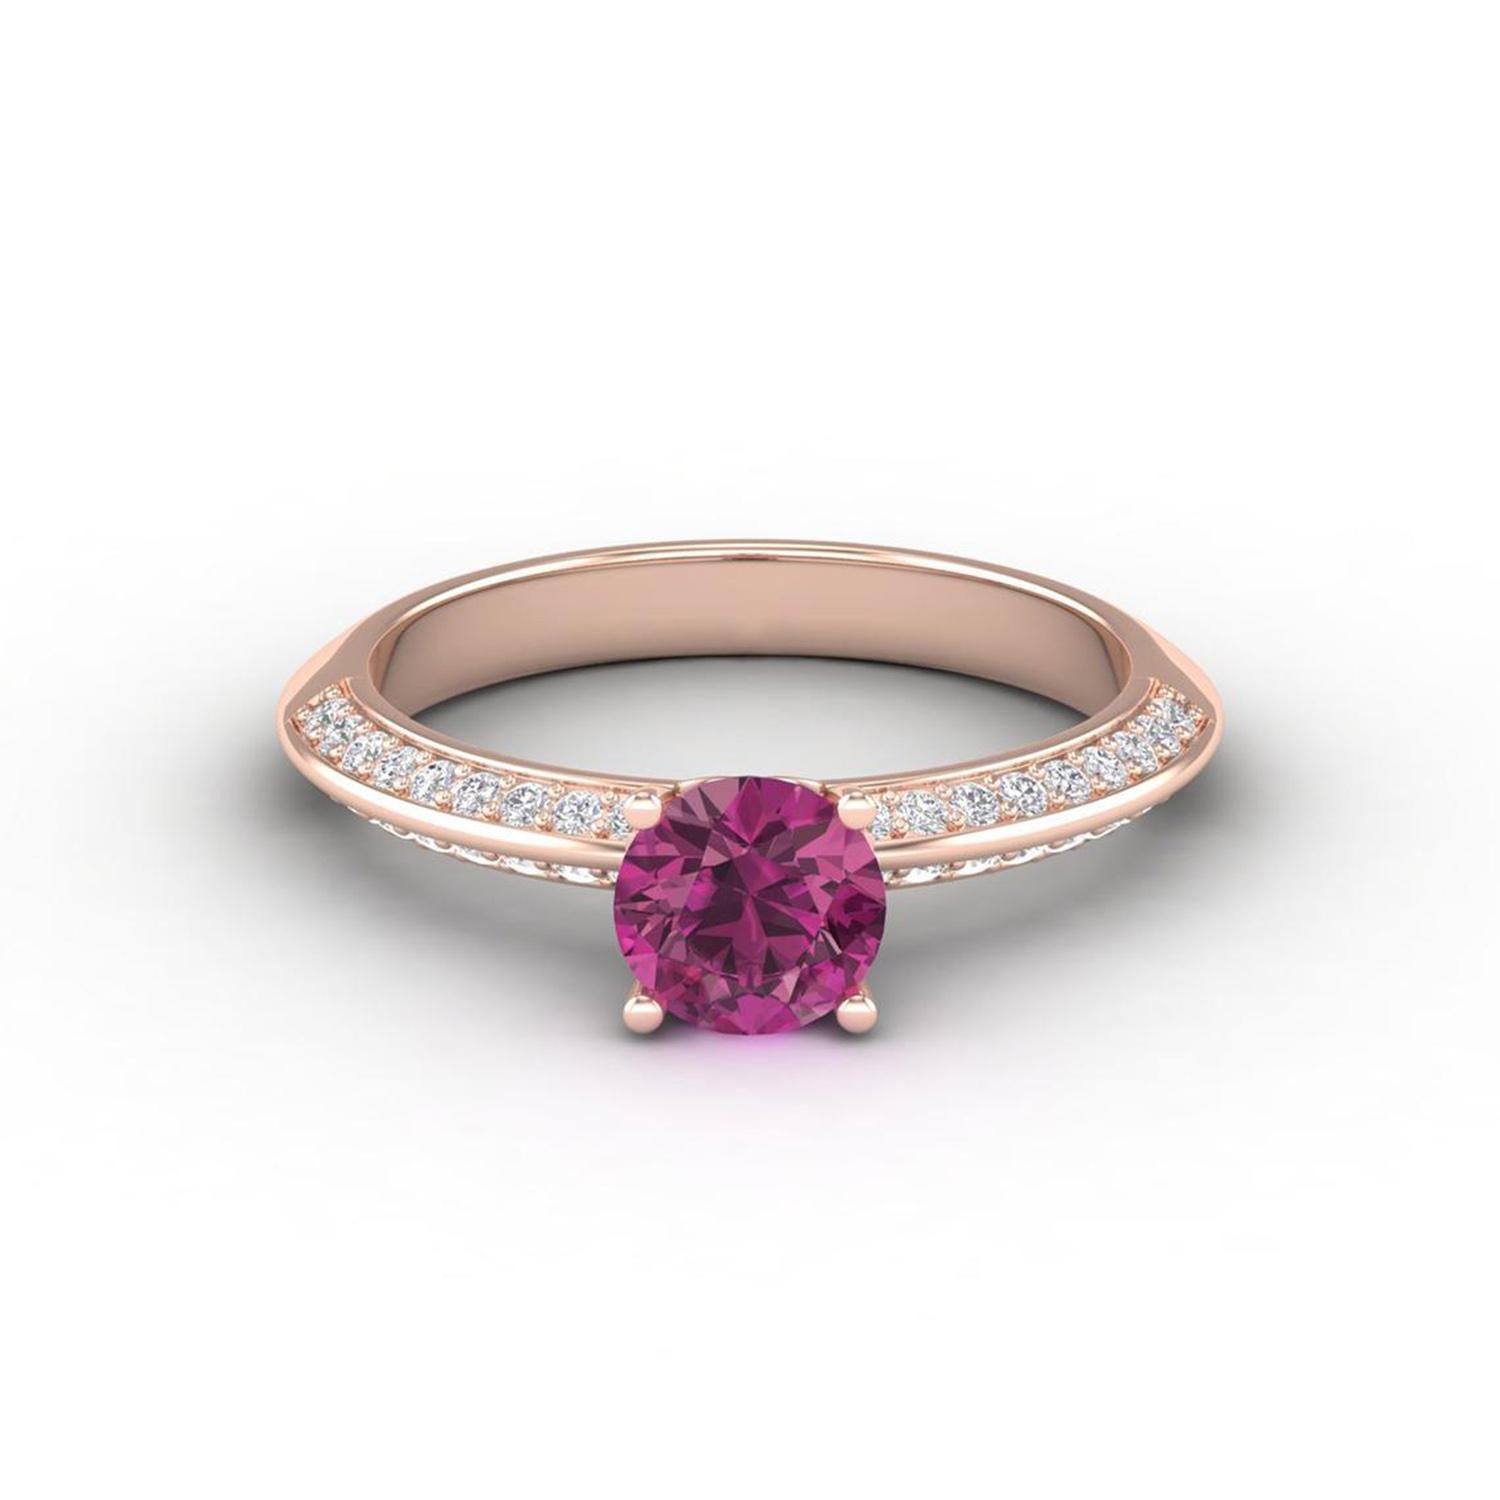 14 K Gold Pink Rubellite Tourmaline Ring / Diamond Solitaire Ring / Ring for Her For Sale 1